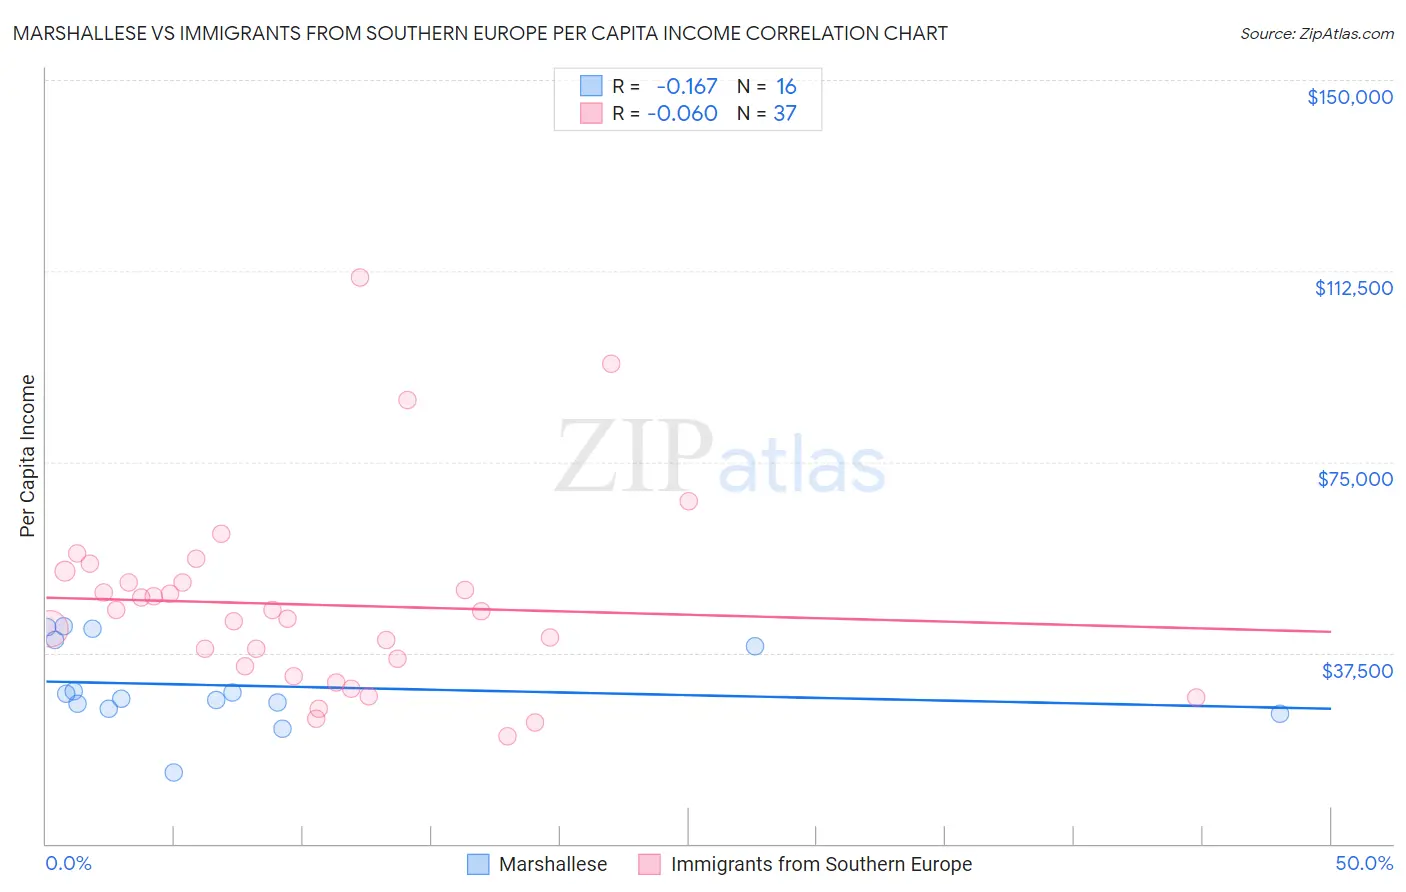 Marshallese vs Immigrants from Southern Europe Per Capita Income